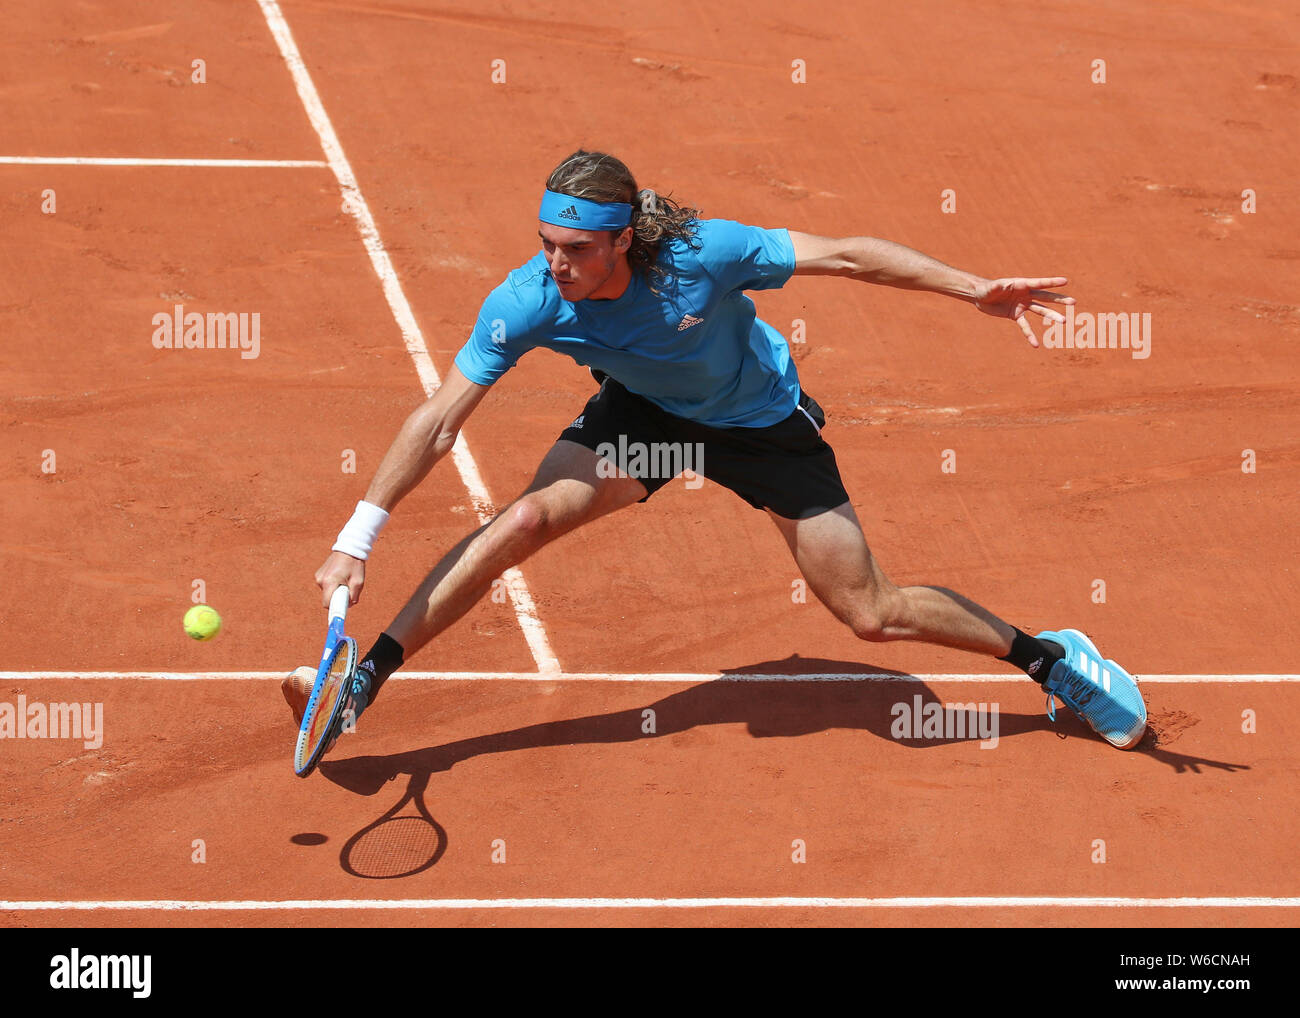 Greek tennis player Stefanos Tsitsipas playing  a backhand shot in French Open 2019  tournament, Paris, France Stock Photo